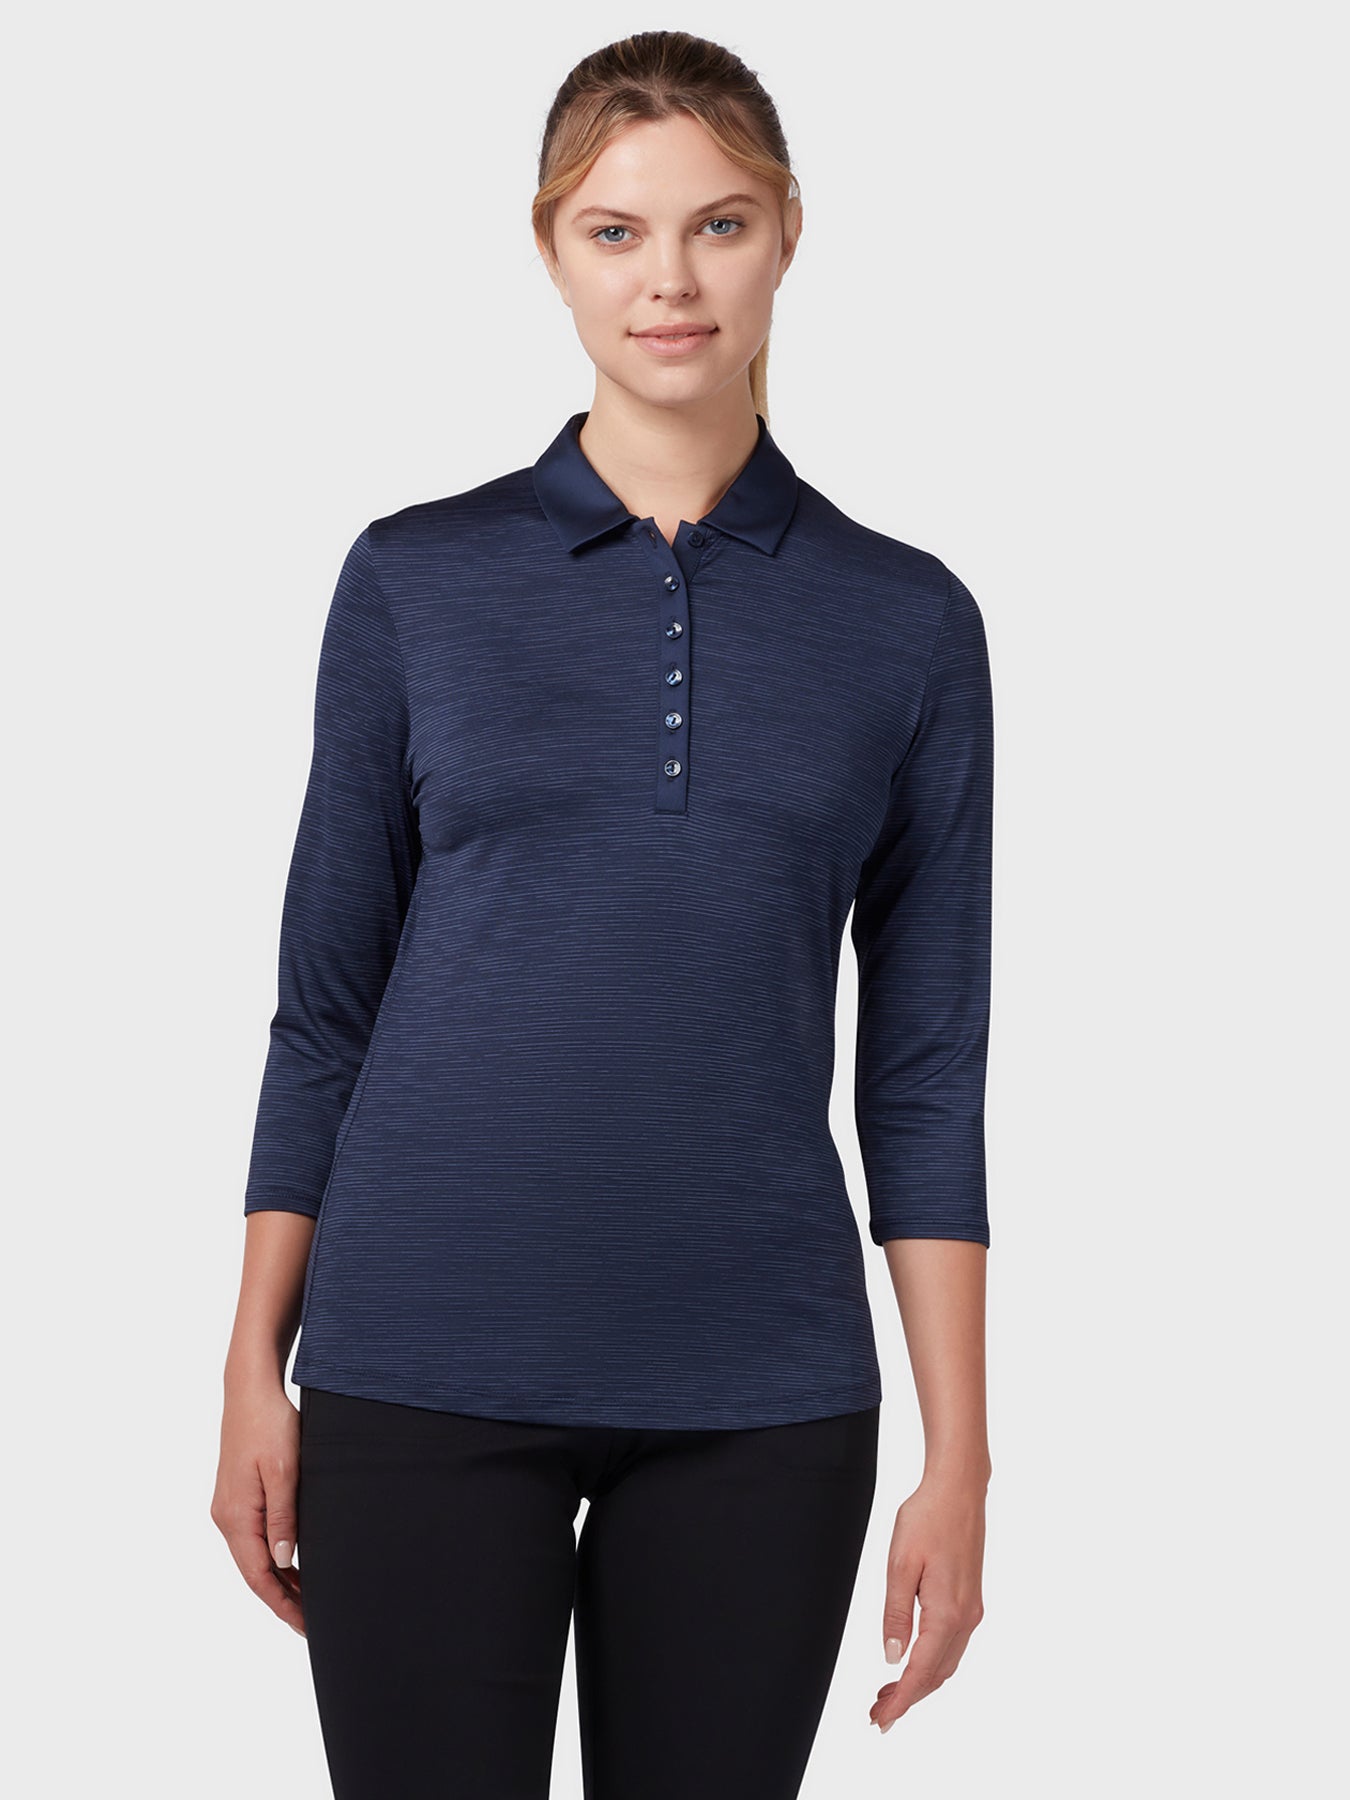 View 34 Length Sleeve Womens Polo In Peacoat information